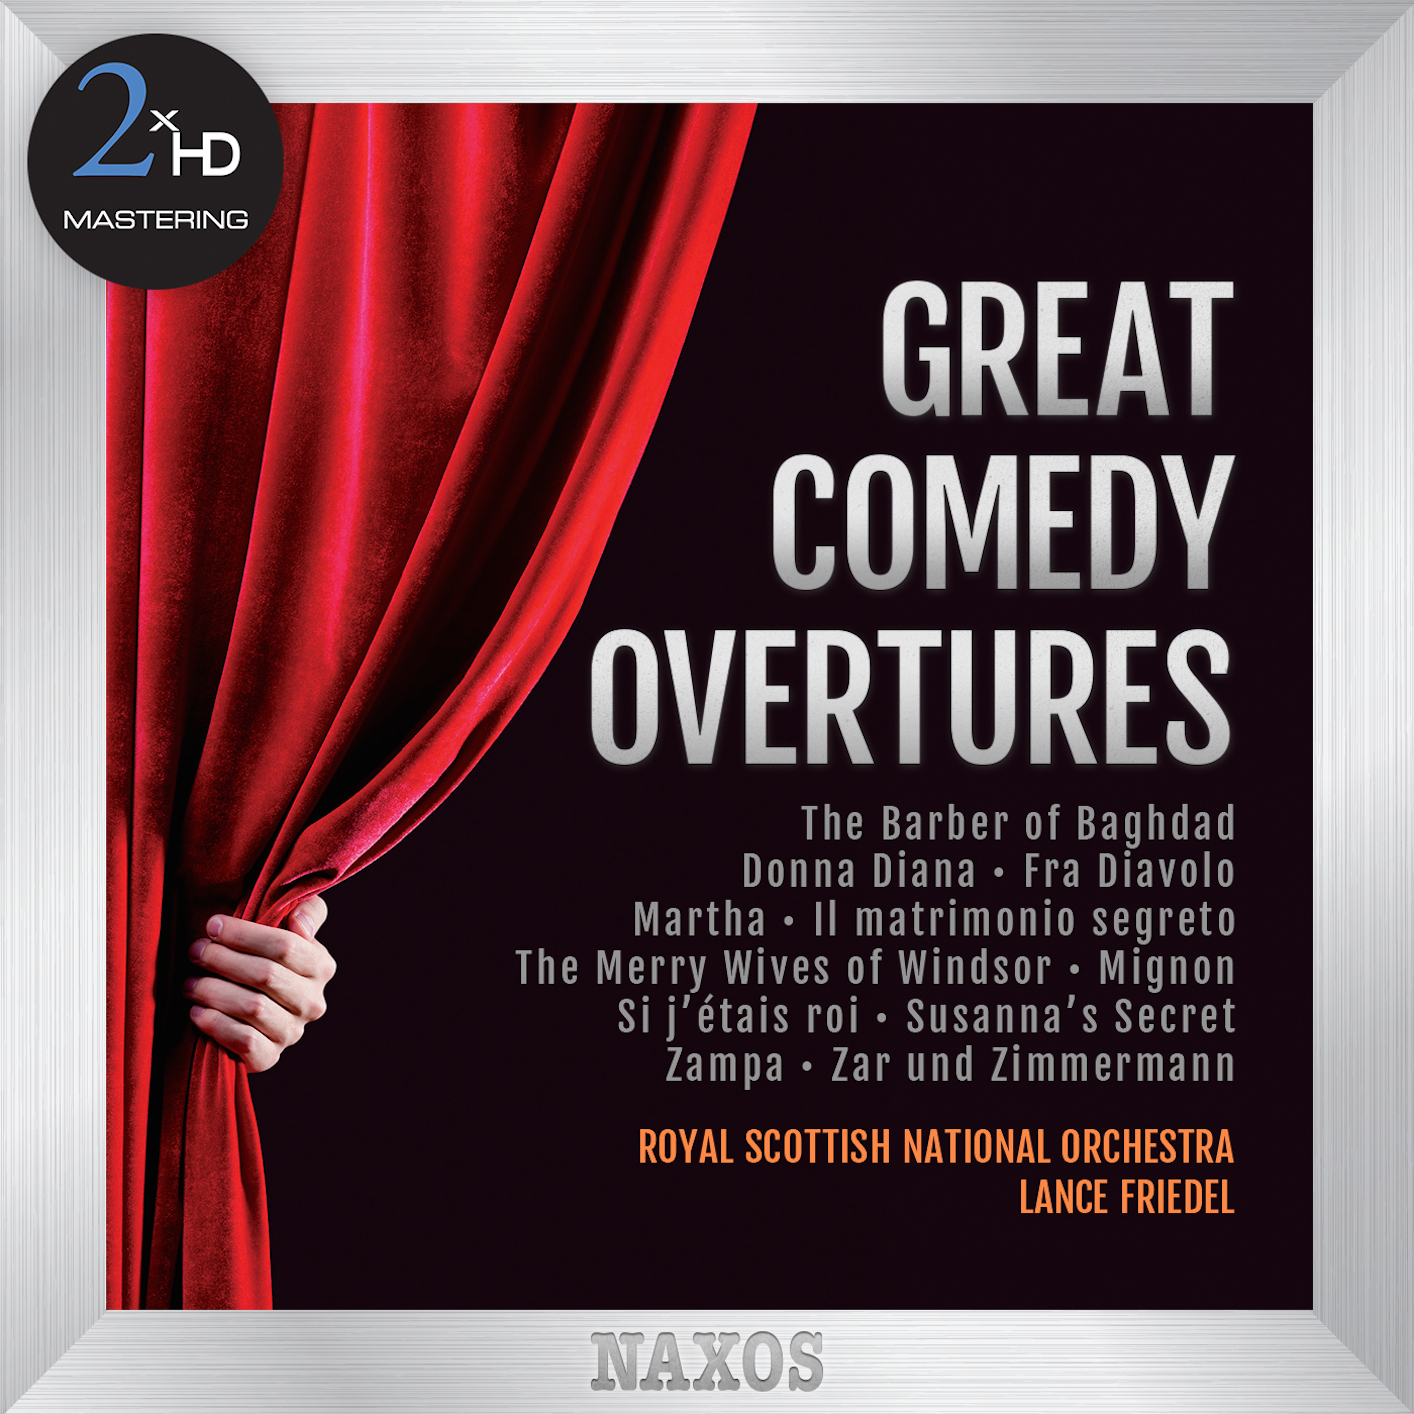 Royal Scottish National Orchestra & Lance Friedel – Great Comedy Overtures (2015) [FLAC 24bit/192kHz]